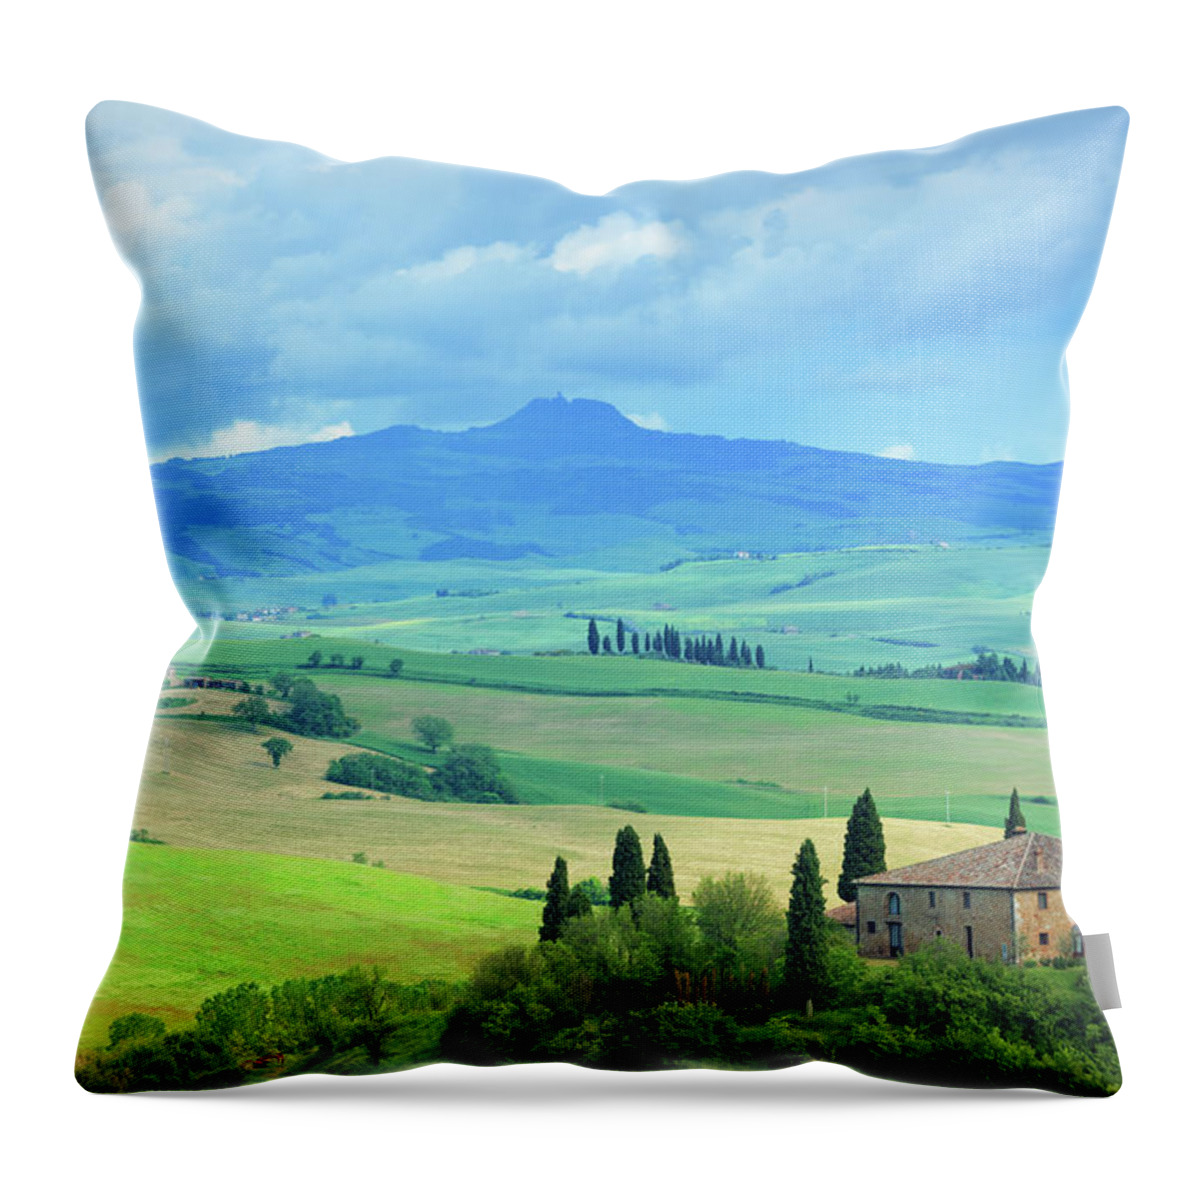 Scenics Throw Pillow featuring the photograph Farm In Tuscany #3 by Mammuth